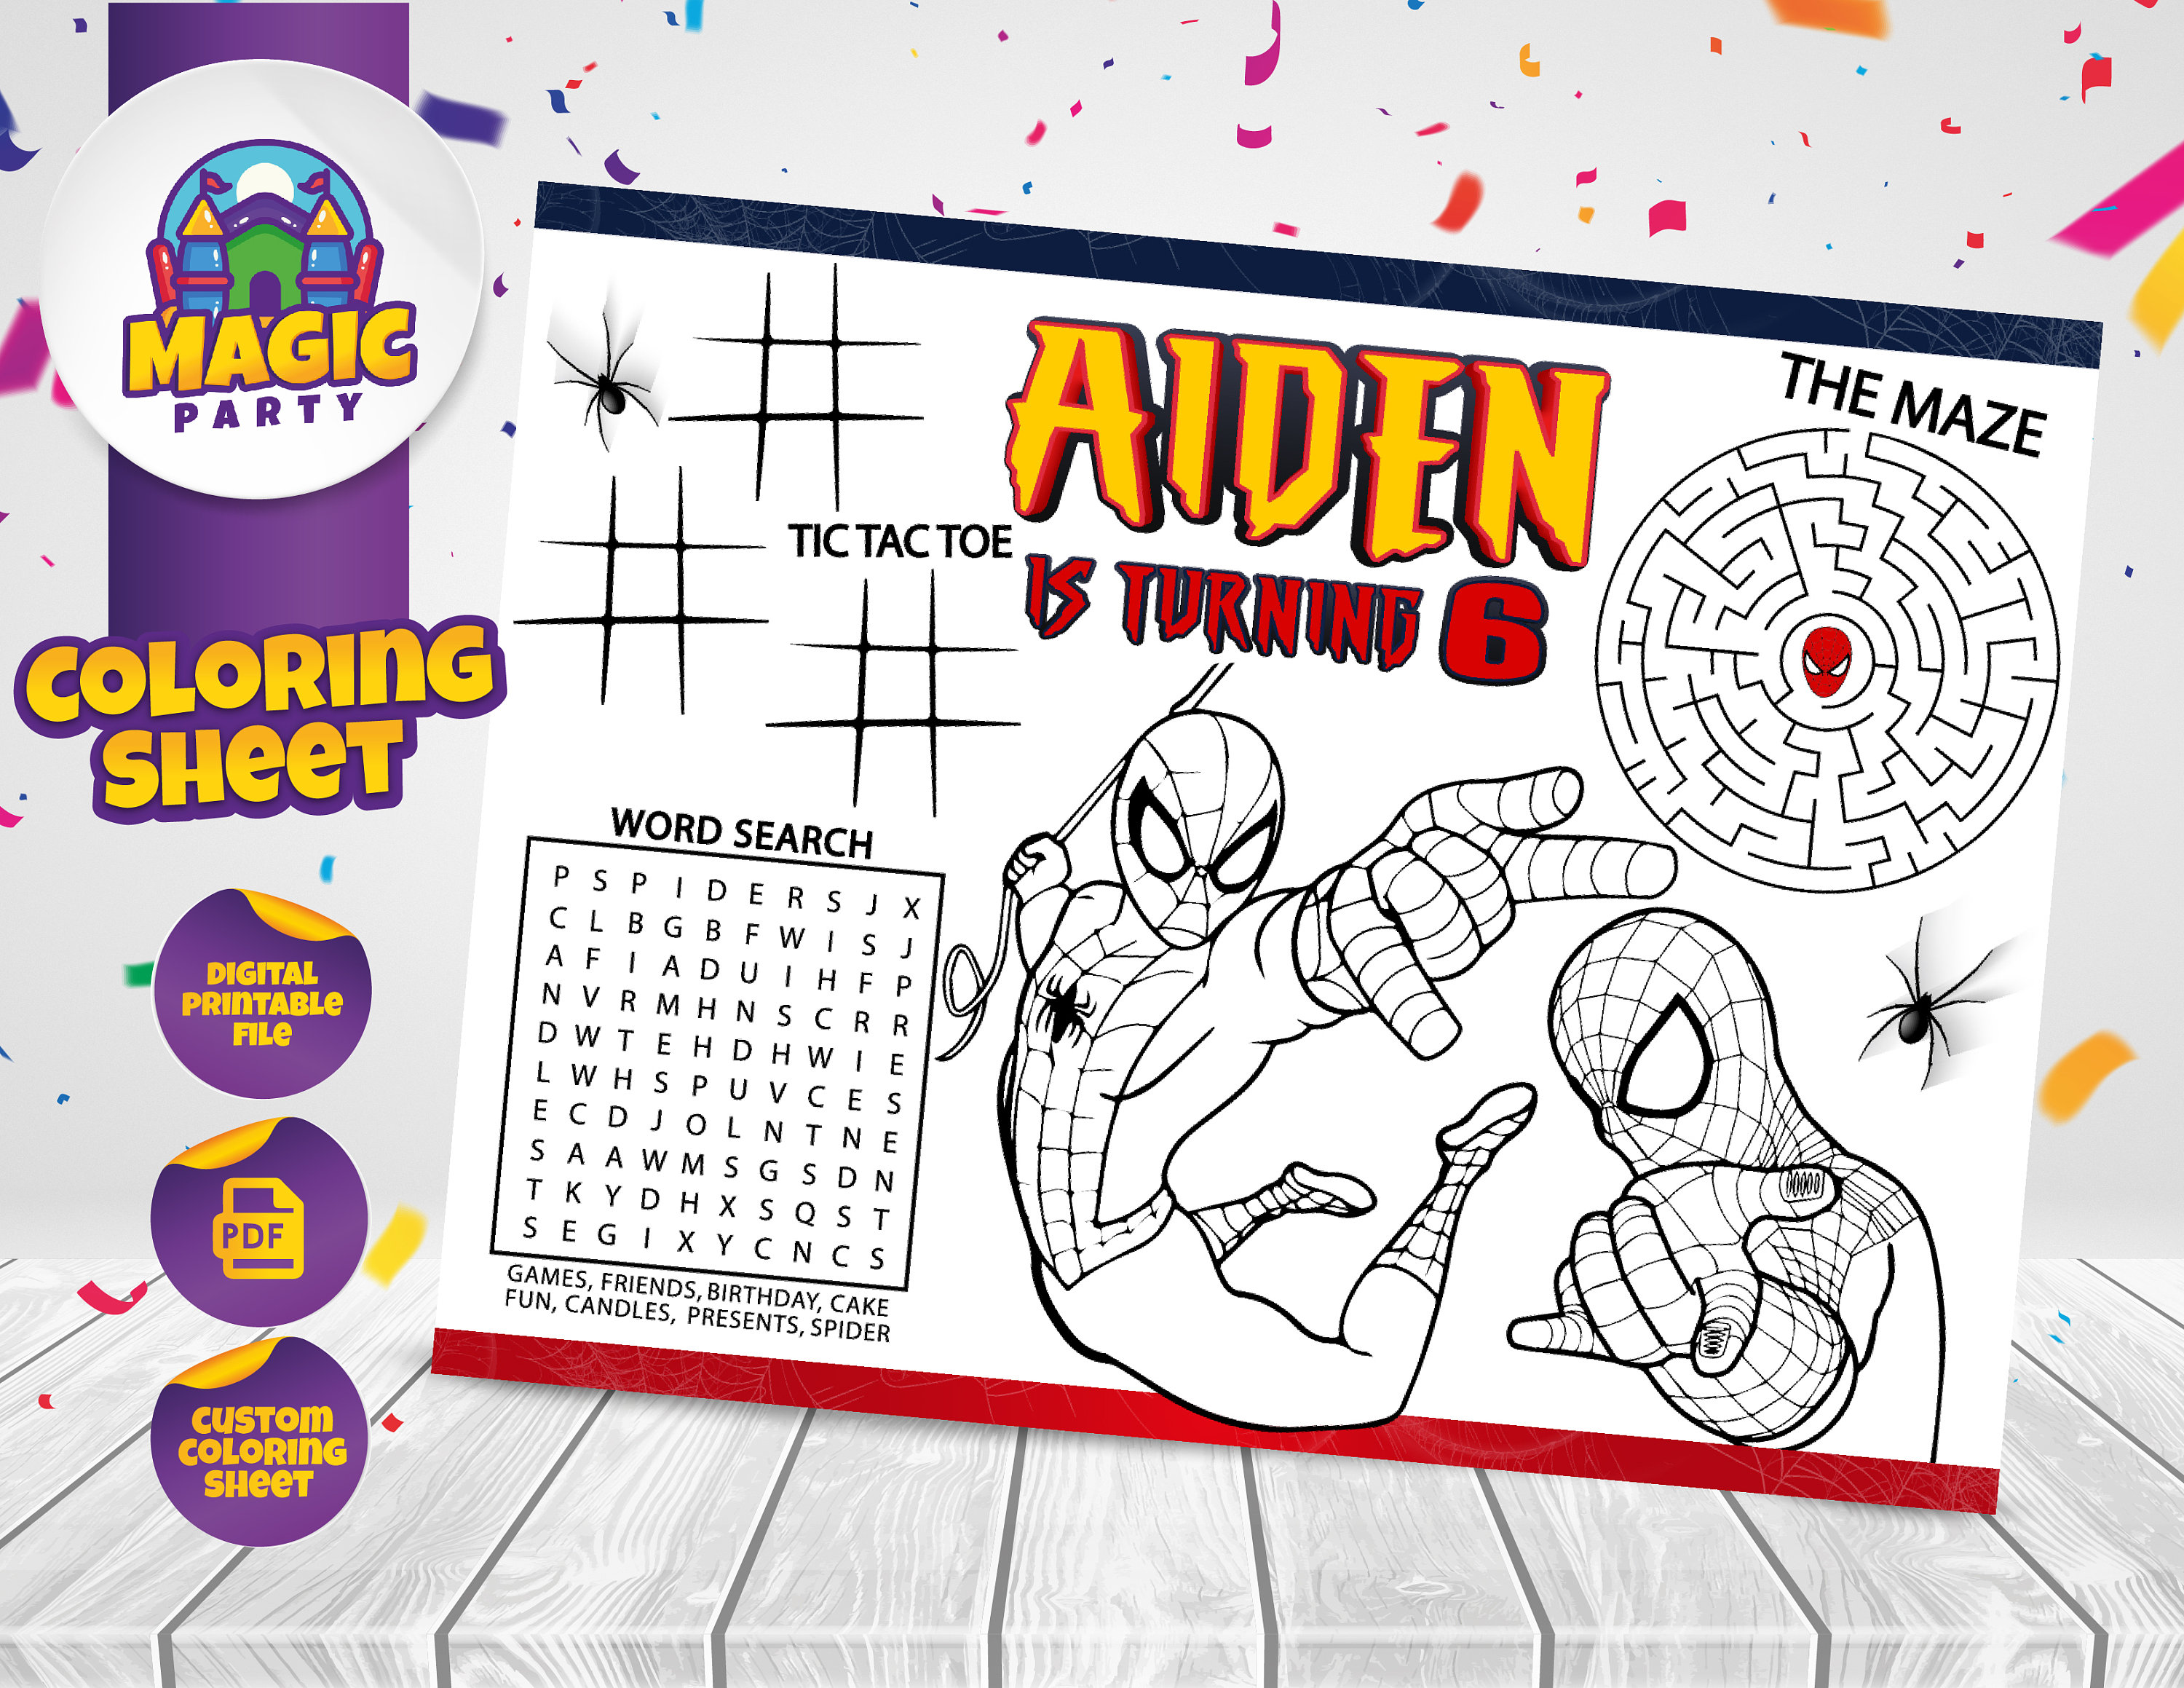 Spiderman coloring sheet party activity birthday printable personalized not instant download digital file